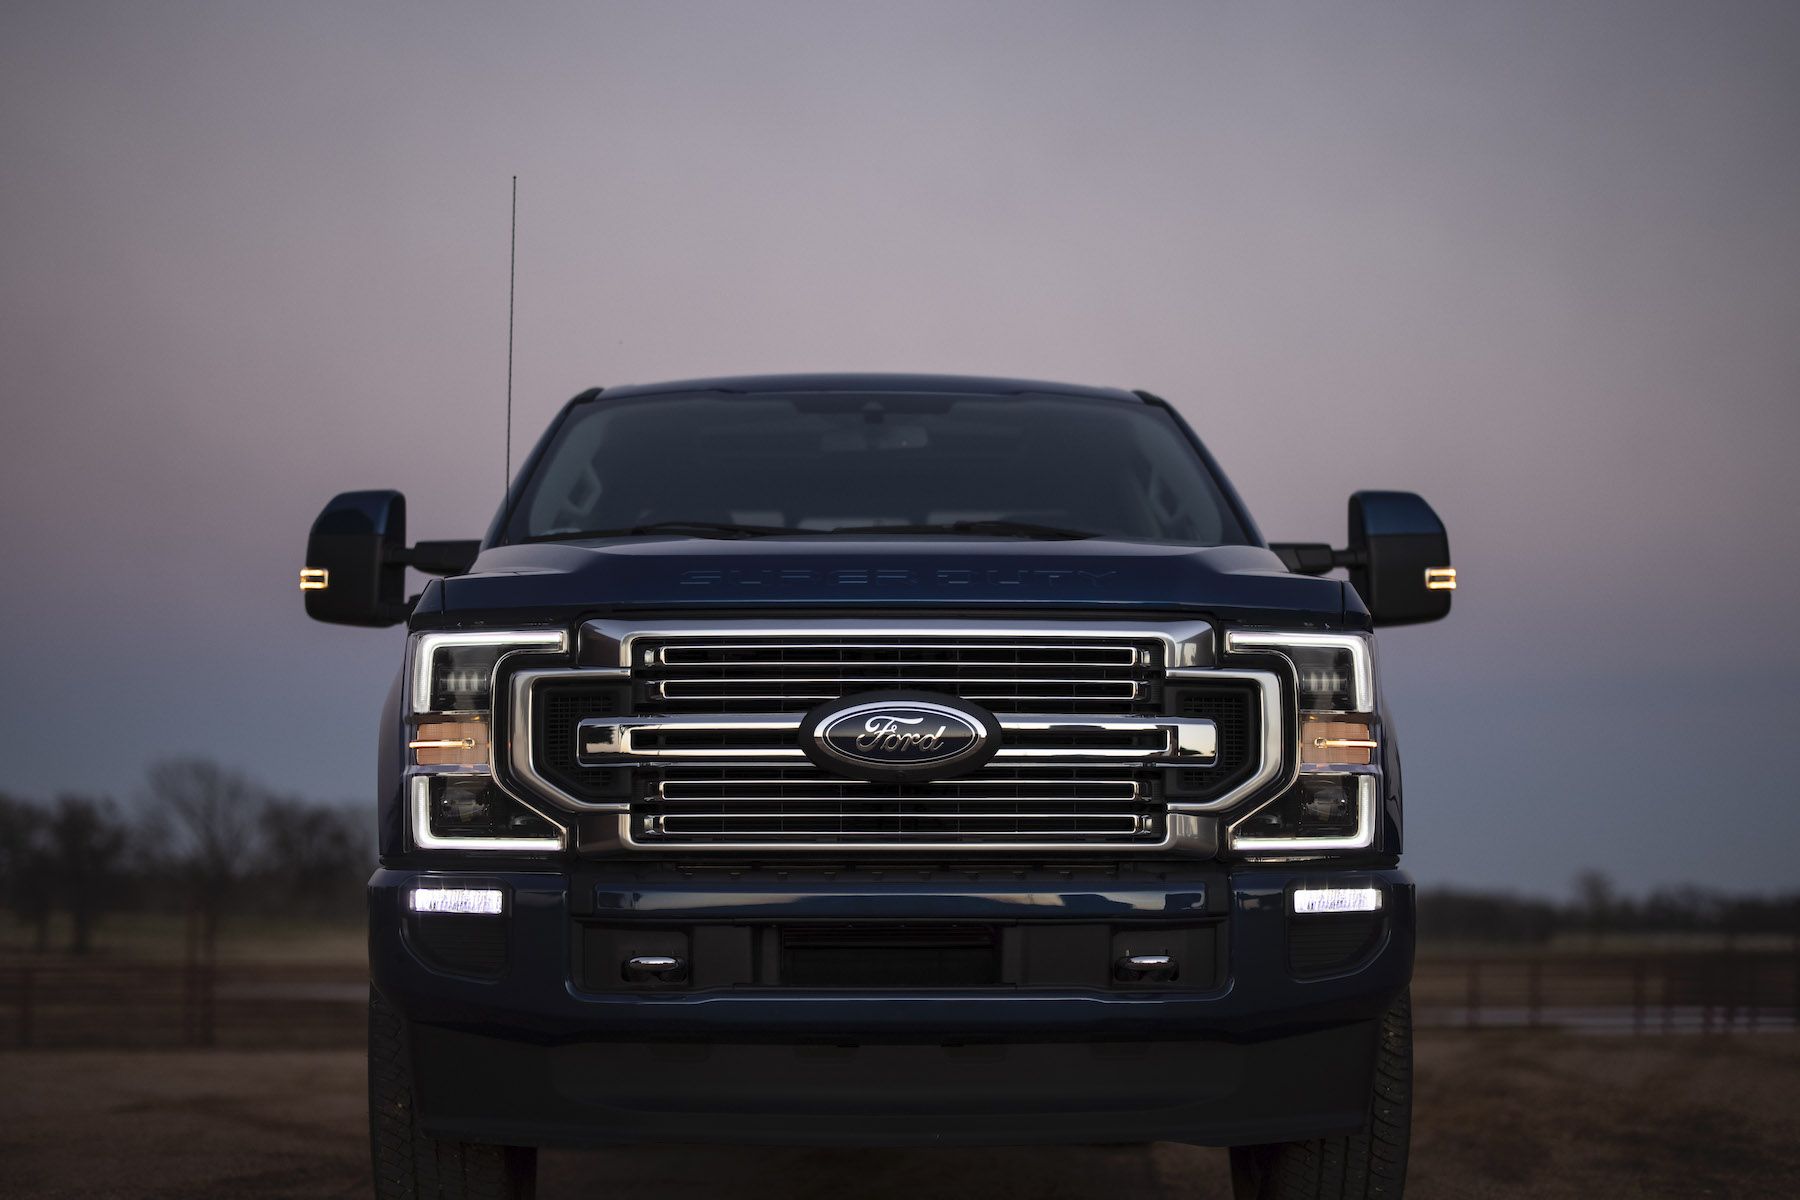 Big 'n' Brawny: These are the 5 largest pickup truck engines ever